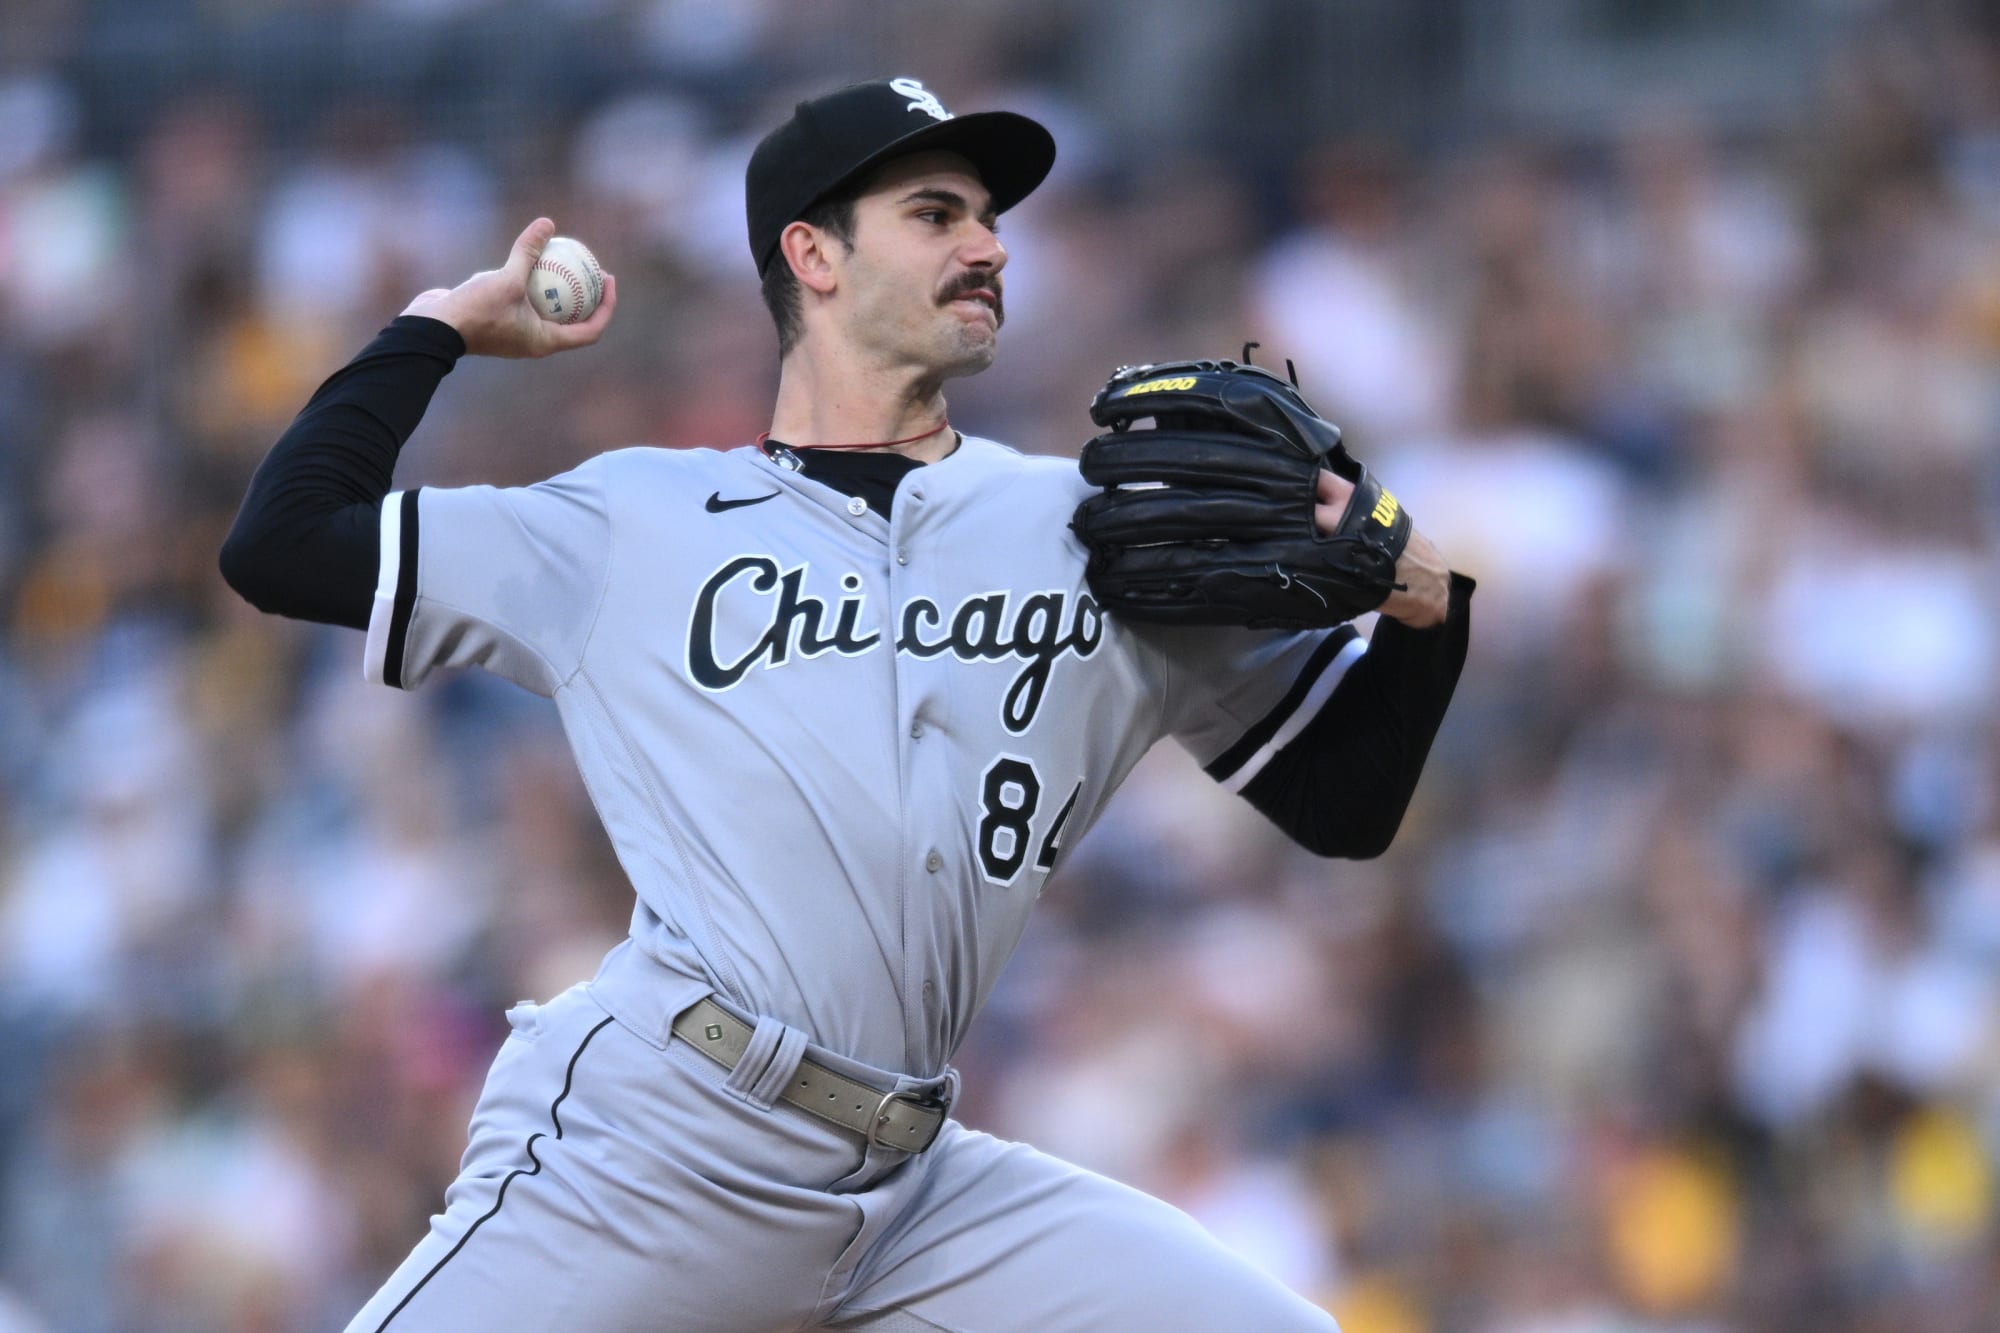 Headed by Cease, White Sox's starting rotation shapes up as a strength